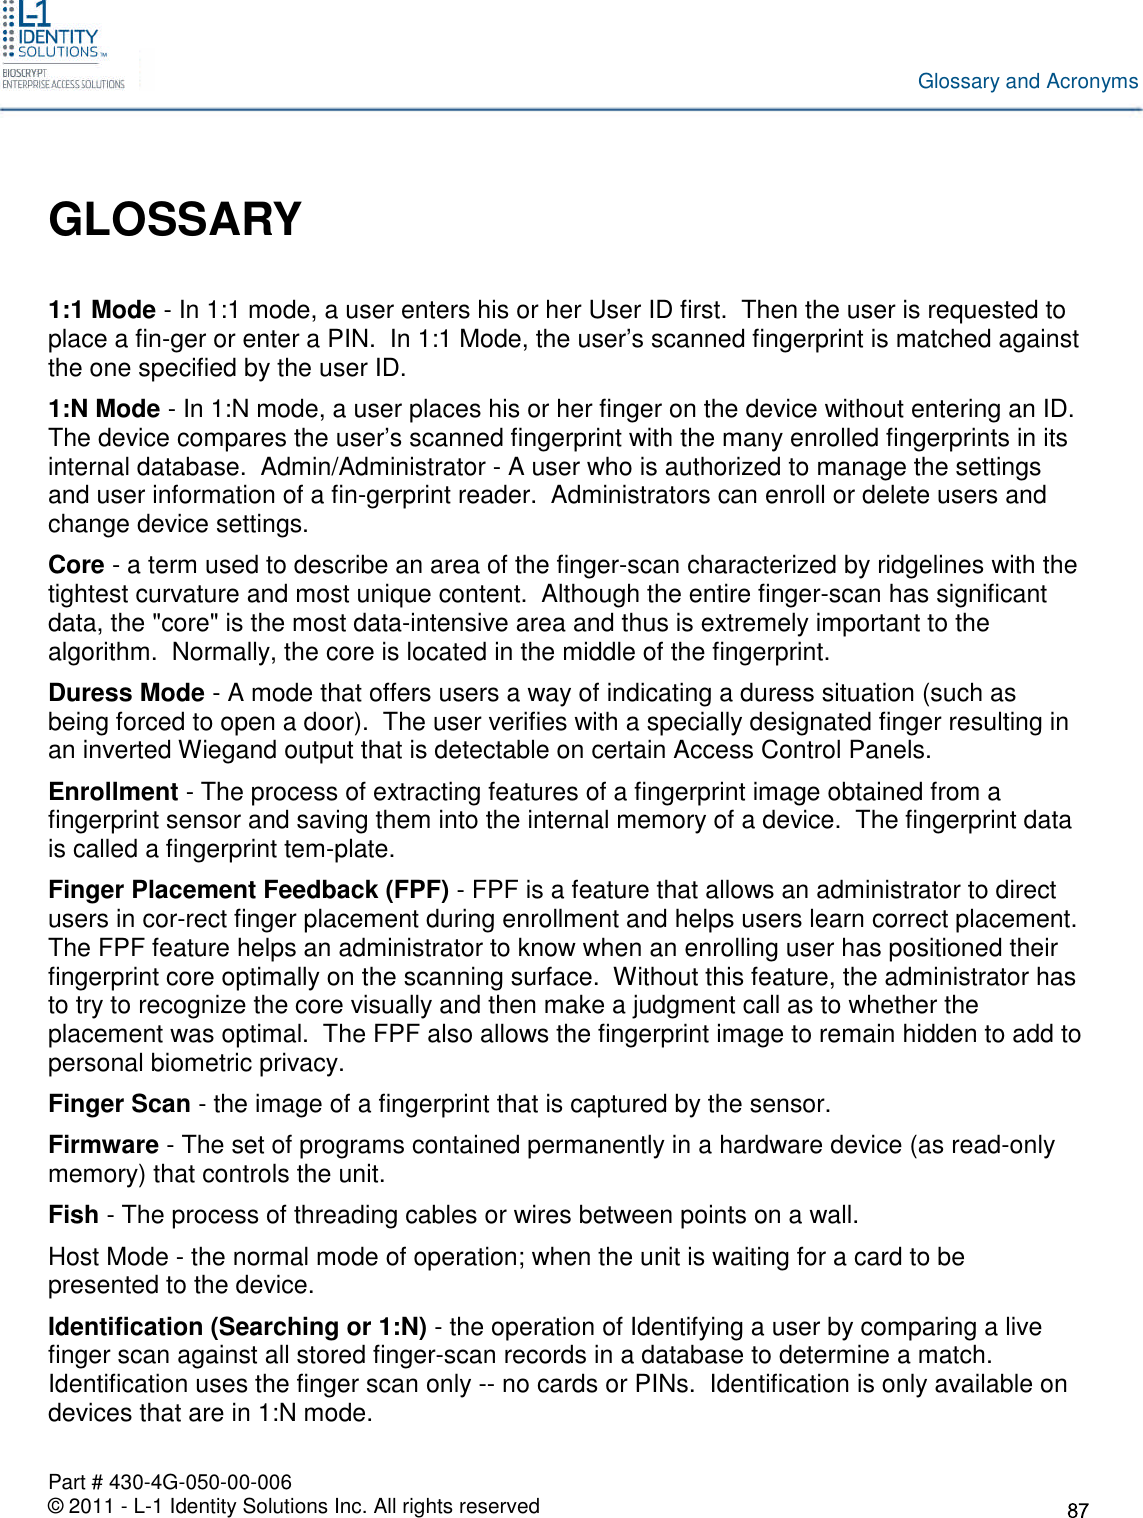 Part # 430-4G-050-00-006© 2011 - L-1 Identity Solutions Inc. All rights reservedGlossary and AcronymsGLOSSARY1:1 Mode - In 1:1 mode, a user enters his or her User ID first. Then the user is requested toplace a fin-ger or enter a PIN. In 1:1 Mode, the user’s scanned fingerprint is matched againstthe one specified by the user ID.1:N Mode - In 1:N mode, a user places his or her finger on the device without entering an ID.The device compares the user’s scanned fingerprint with the many enrolled fingerprints in itsinternal database. Admin/Administrator - A user who is authorized to manage the settingsand user information of a fin-gerprint reader. Administrators can enroll or delete users andchange device settings.Core - a term used to describe an area of the finger-scan characterized by ridgelines with thetightest curvature and most unique content. Although the entire finger-scan has significantdata, the &quot;core&quot; is the most data-intensive area and thus is extremely important to thealgorithm. Normally, the core is located in the middle of the fingerprint.Duress Mode - A mode that offers users a way of indicating a duress situation (such asbeing forced to open a door). The user verifies with a specially designated finger resulting inan inverted Wiegand output that is detectable on certain Access Control Panels.Enrollment - The process of extracting features of a fingerprint image obtained from afingerprint sensor and saving them into the internal memory of a device. The fingerprint datais called a fingerprint tem-plate.Finger Placement Feedback (FPF) - FPF is a feature that allows an administrator to directusers in cor-rect finger placement during enrollment and helps users learn correct placement.The FPF feature helps an administrator to know when an enrolling user has positioned theirfingerprint core optimally on the scanning surface. Without this feature, the administrator hasto try to recognize the core visually and then make a judgment call as to whether theplacement was optimal. The FPF also allows the fingerprint image to remain hidden to add topersonal biometric privacy.Finger Scan - the image of a fingerprint that is captured by the sensor.Firmware - The set of programs contained permanently in a hardware device (as read-onlymemory) that controls the unit.Fish - The process of threading cables or wires between points on a wall.Host Mode - the normal mode of operation; when the unit is waiting for a card to bepresented to the device.Identification (Searching or 1:N) - the operation of Identifying a user by comparing a livefinger scan against all stored finger-scan records in a database to determine a match.Identification uses the finger scan only -- no cards or PINs. Identification is only available ondevices that are in 1:N mode.